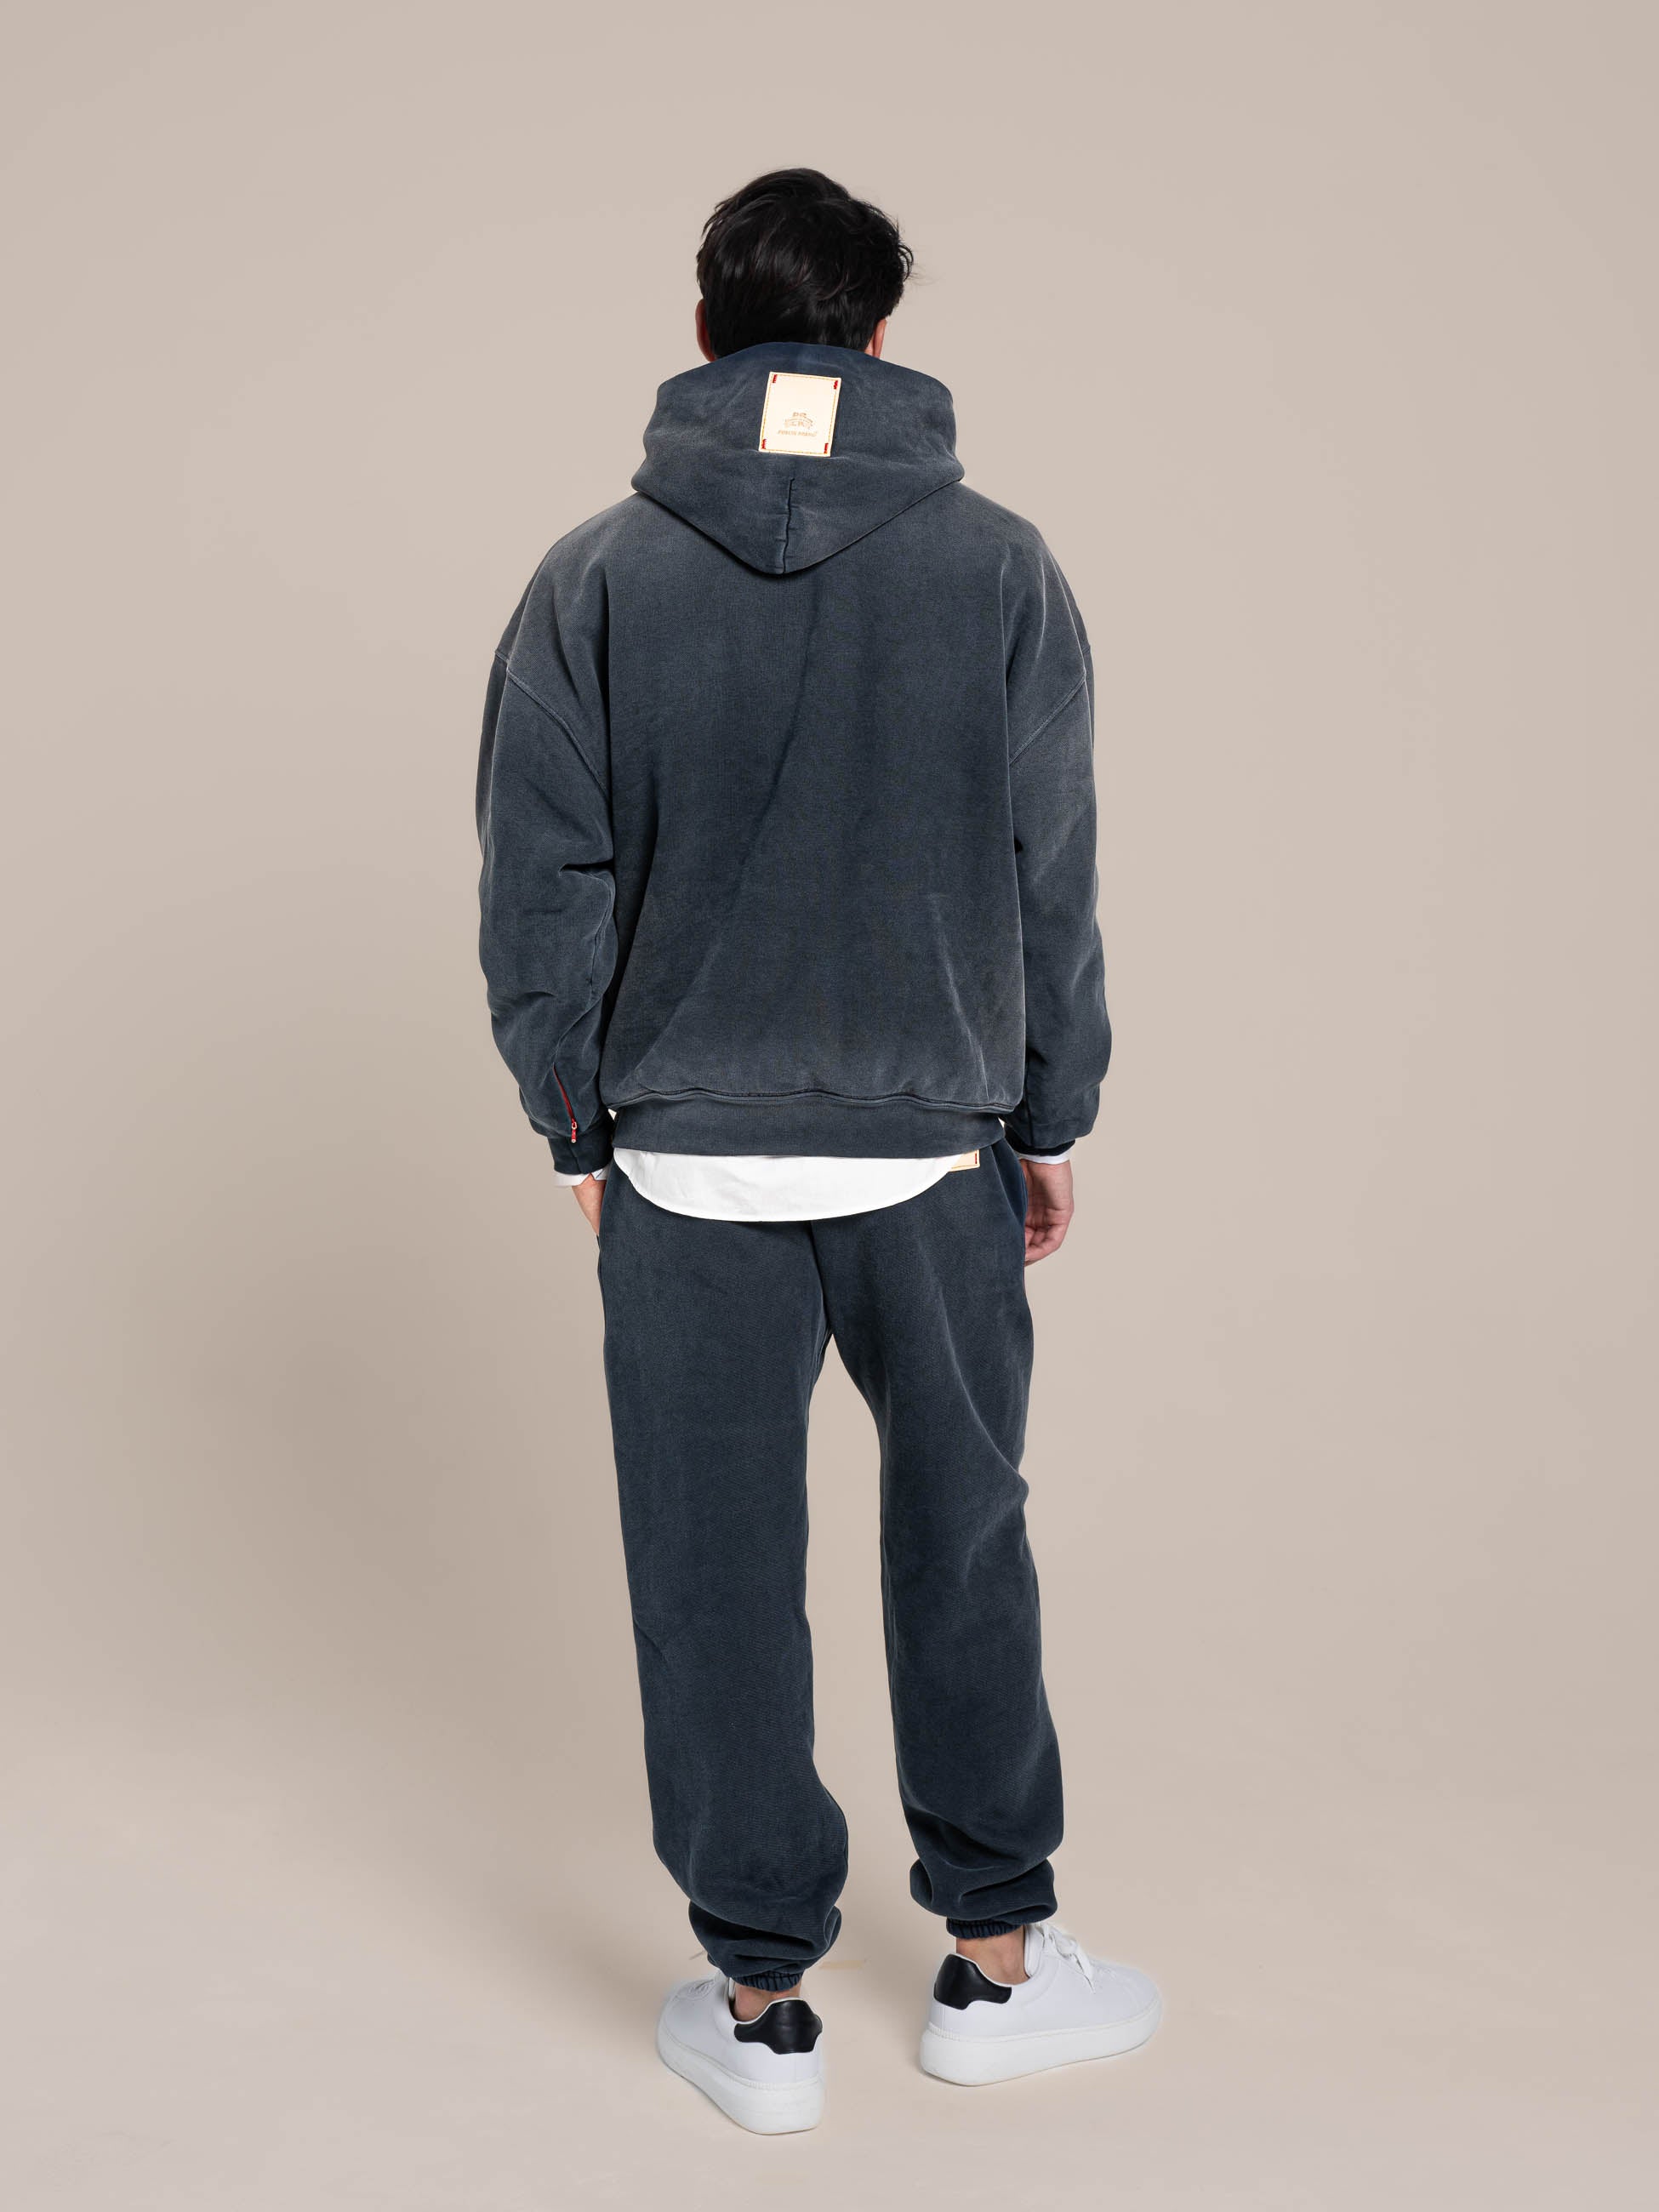 Male model shows details on the back of the navy hoodie and navy sweatpants Made in USA